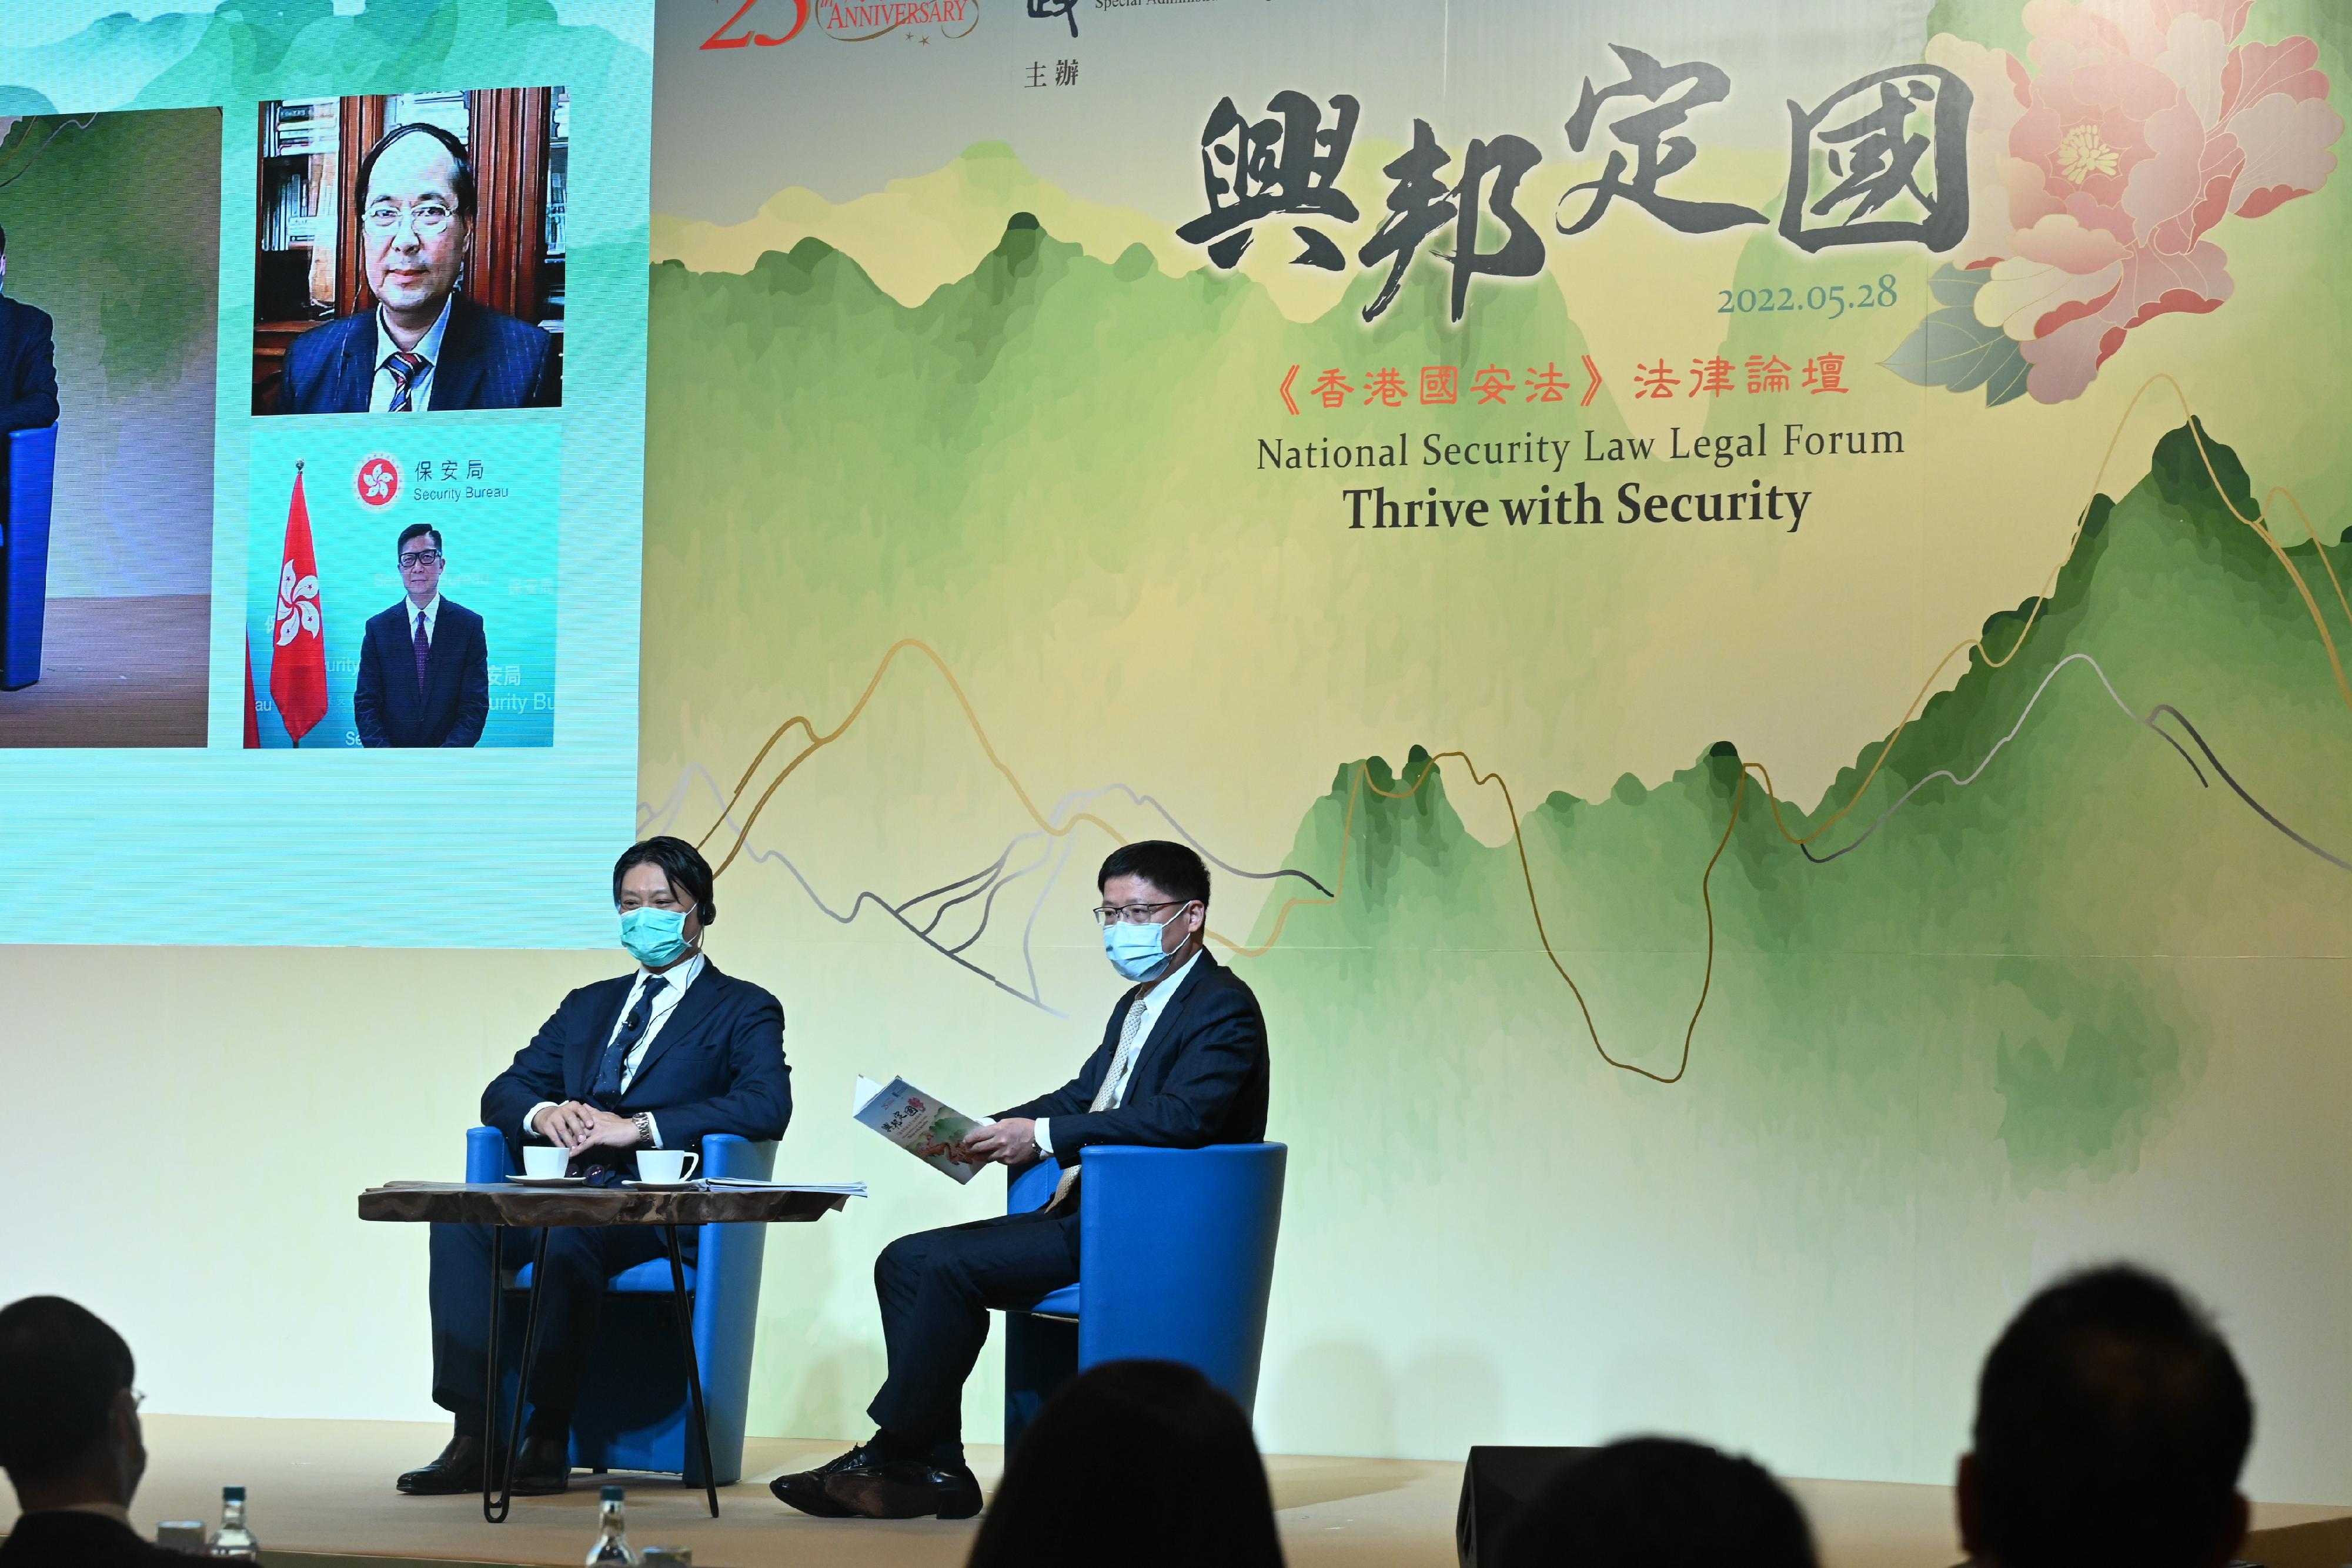 The National Security Law Legal Forum under the theme "Thrive with Security" organised by the Department of Justice was held today (May 28). Photo shows eminent speakers from various fields at panel session 3 on Refining the Legal Framework of the Hong Kong Special Administrative Region on Safeguarding National Security.
